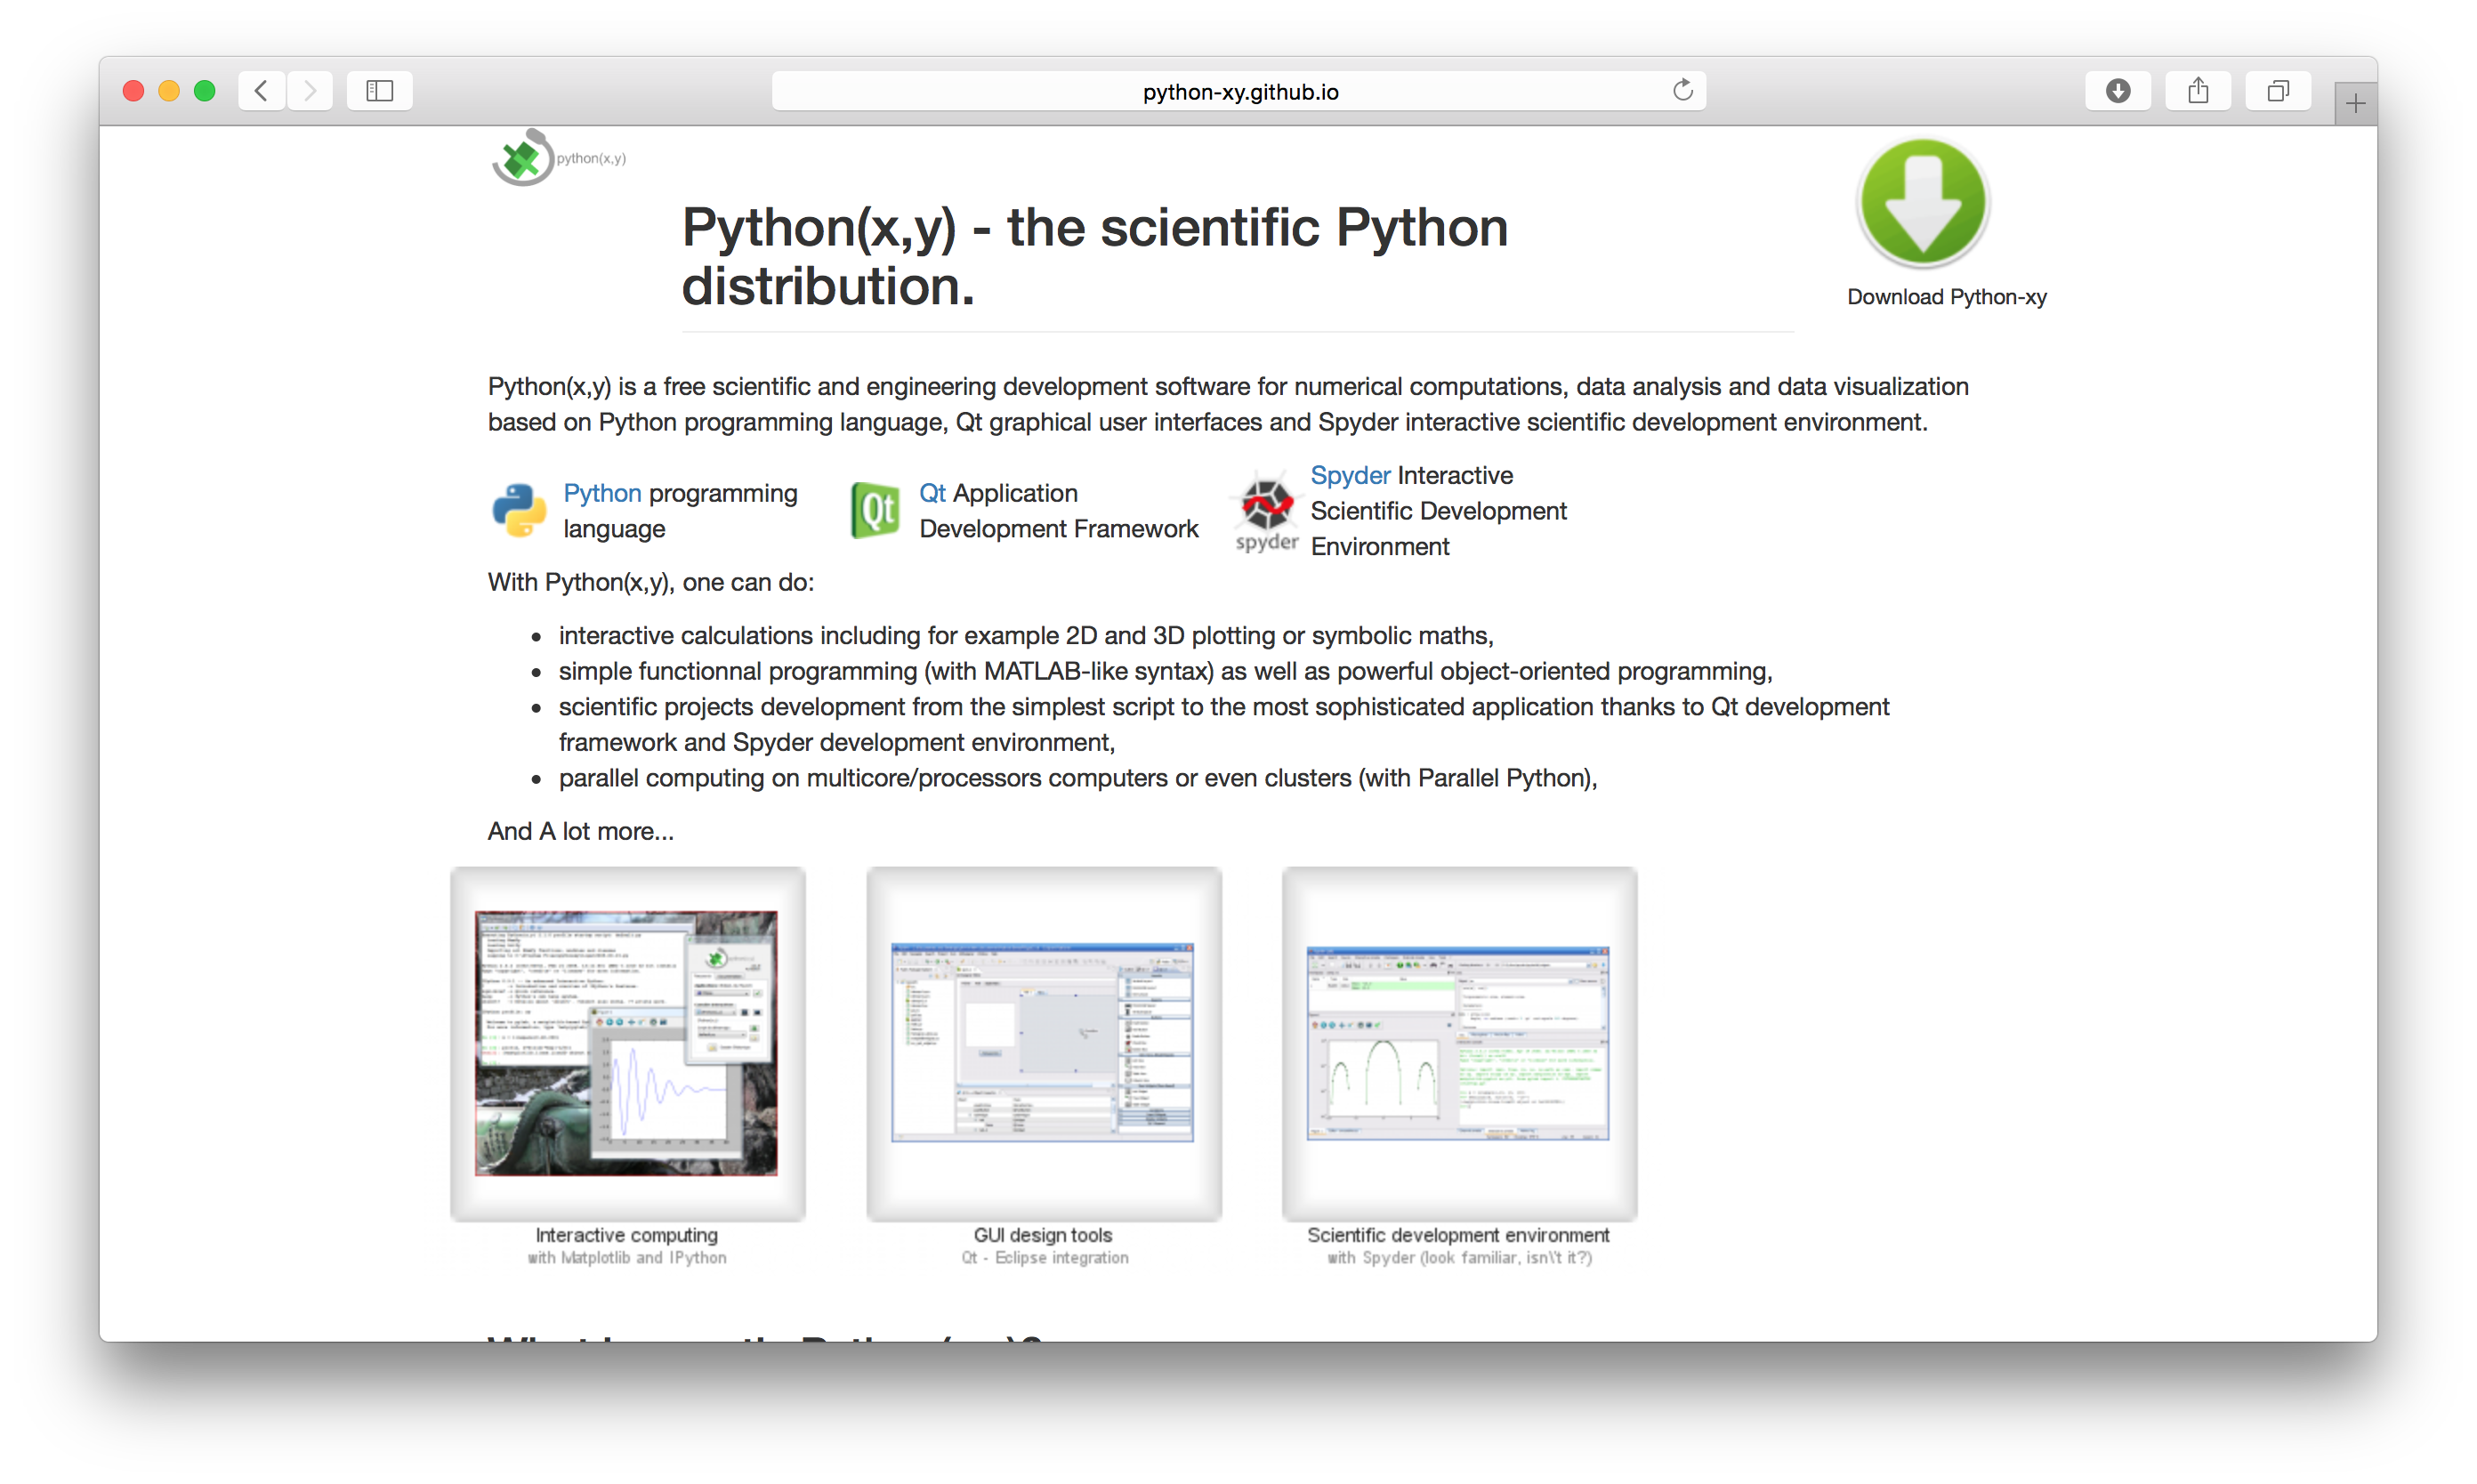 download anaconda for mac with all libraries